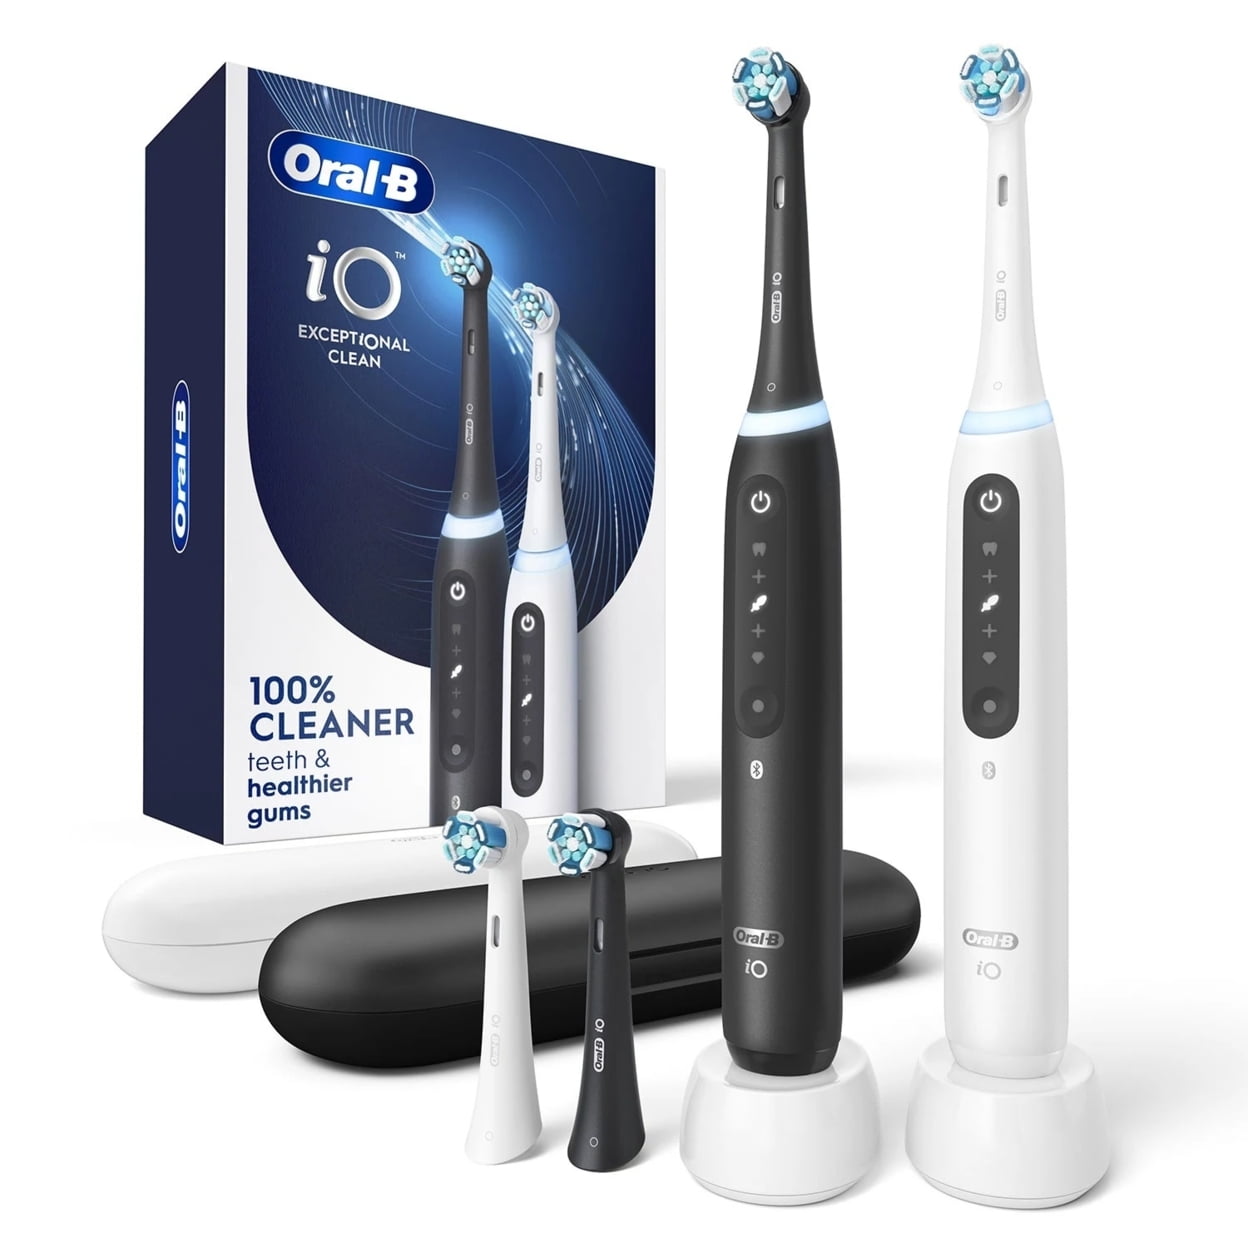 Oral-B iO Rechargeable Pack 5 Dual Series Toothbrush